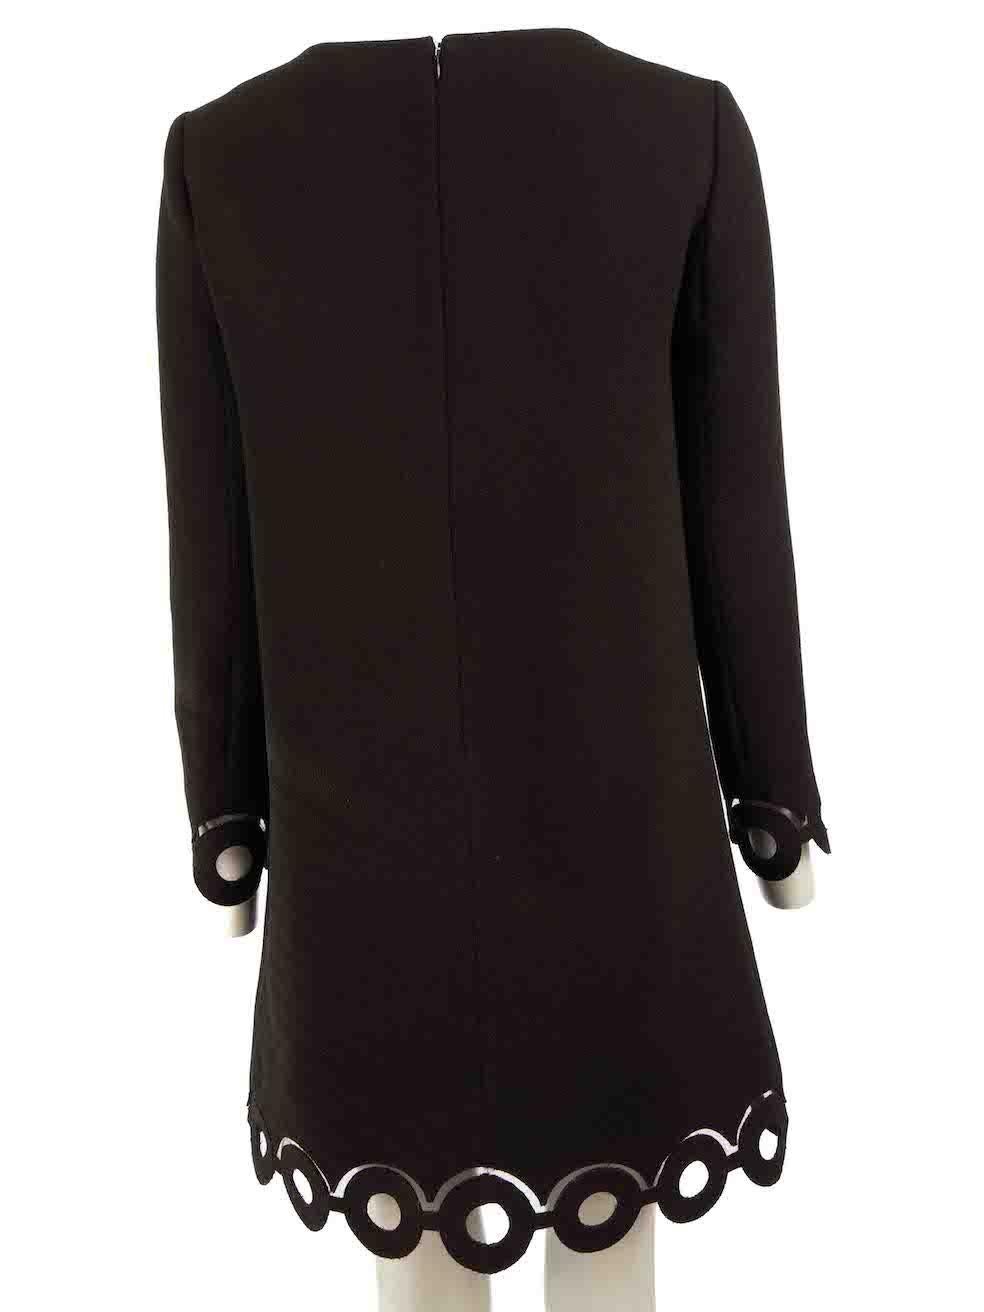 Carven Black Cut Out Ring Hem Mini Dress Size S In Excellent Condition For Sale In London, GB